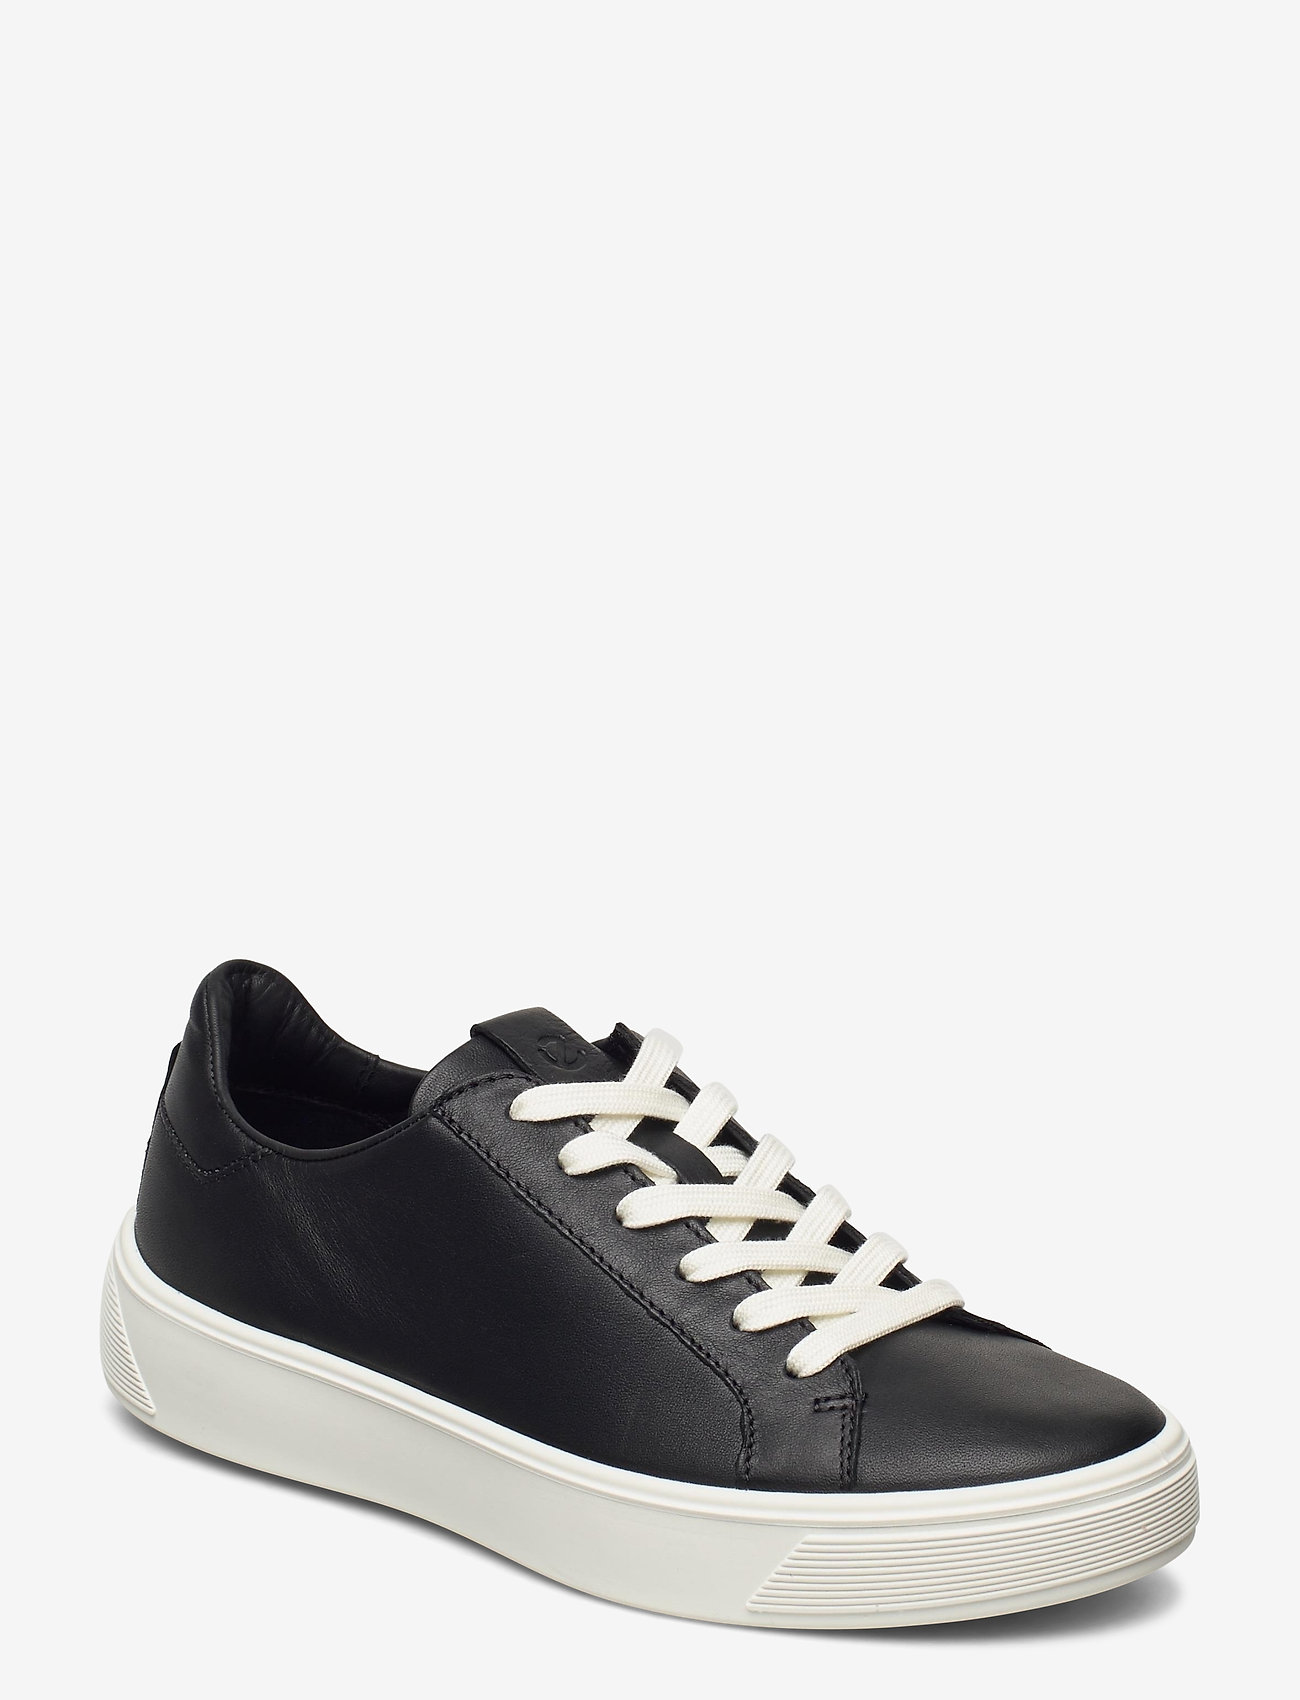 ECCO Women's Soft Piping Detail Leather Sneakers | Ladies Black Leather ...